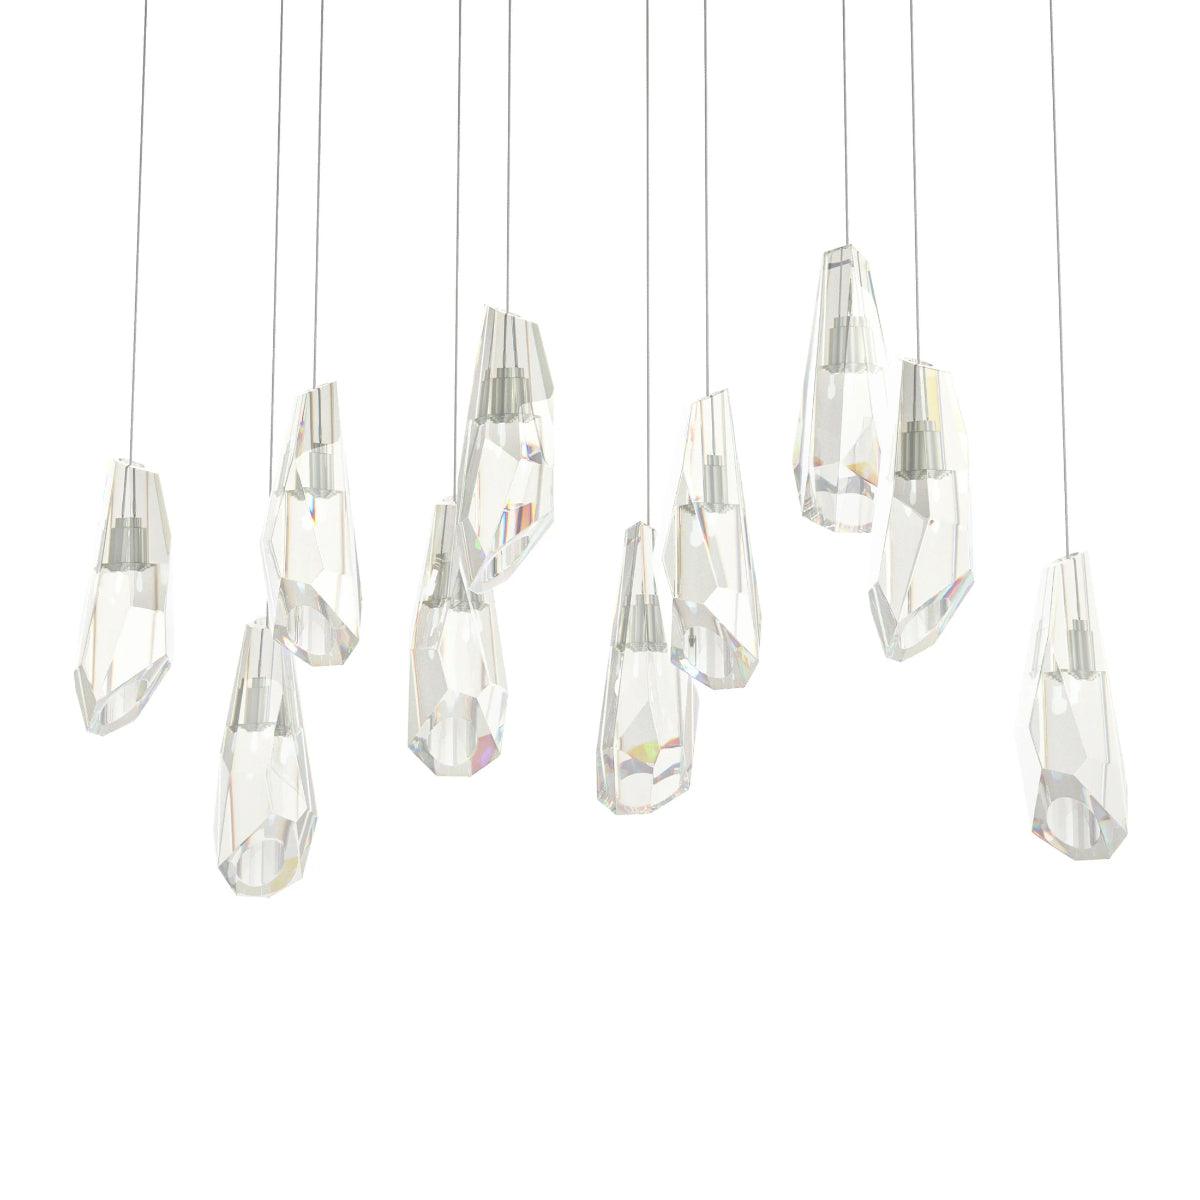 Luma 45 in. 10 Lights Linear Pendant Light with Long Height